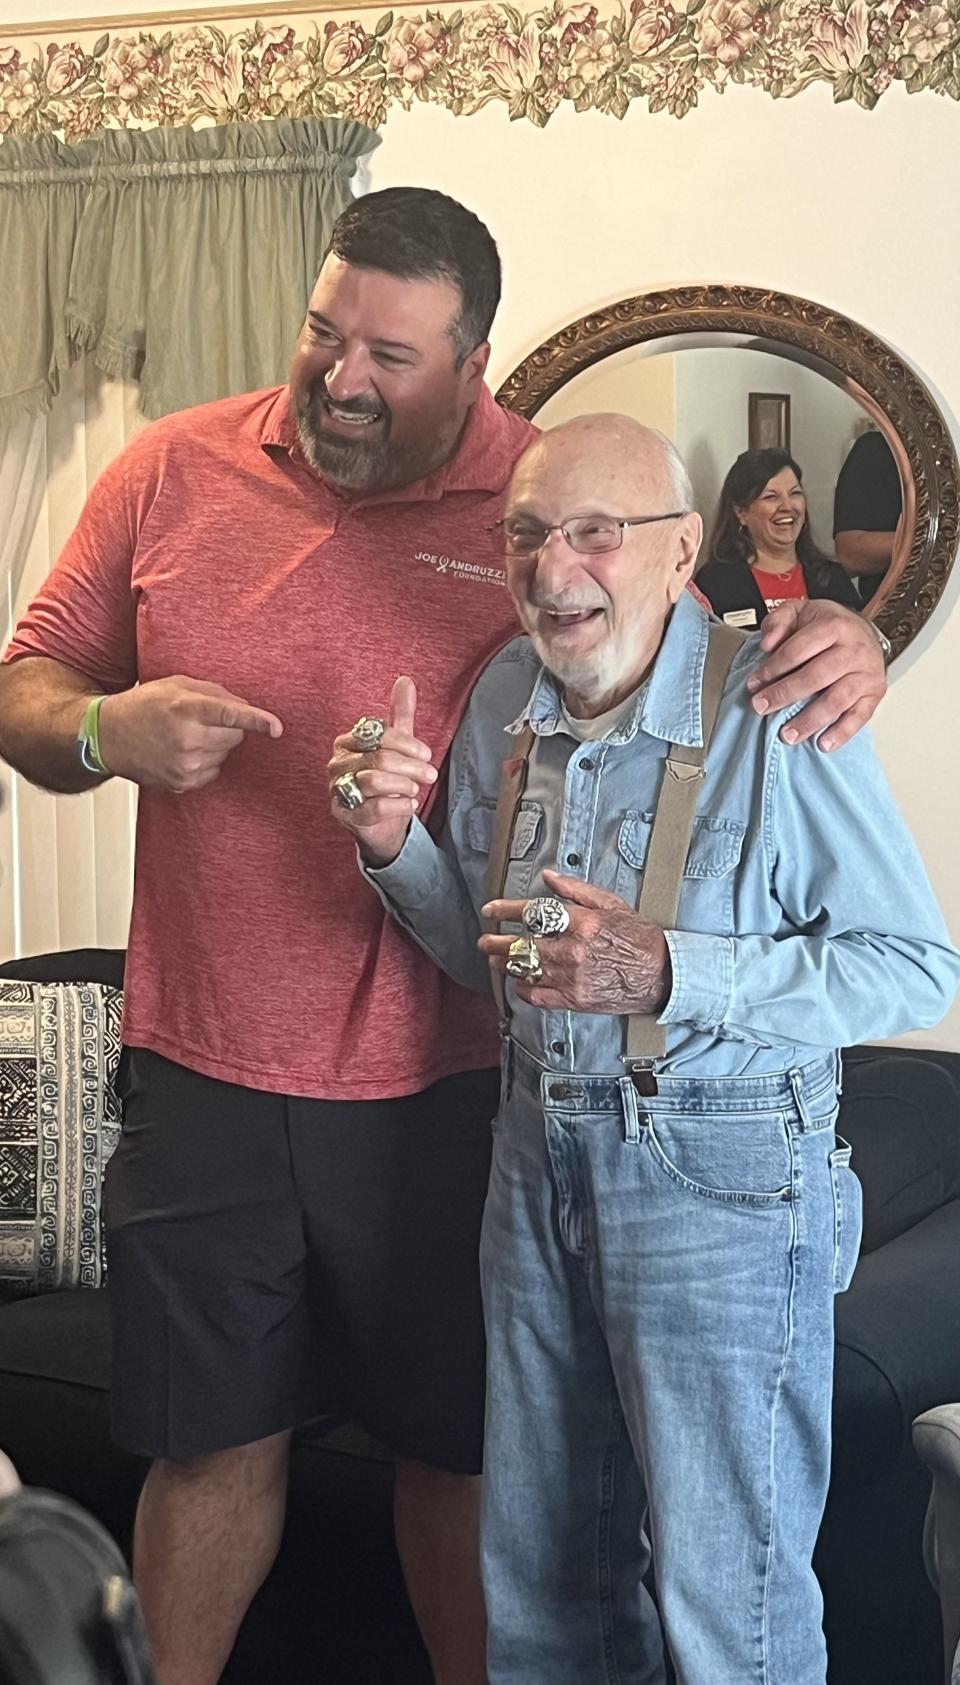 Former New England Patriot and three-time Super Bowl champion Joe Andruzzi met up with and delivered groceries to Rudy Longo, a 91-year-old leukemia and prostate cancer patient, to his Stratham house Wednesday, Sept. 13, 2023. Longo is seen wearing Andruzzi's Super Bowl rings.